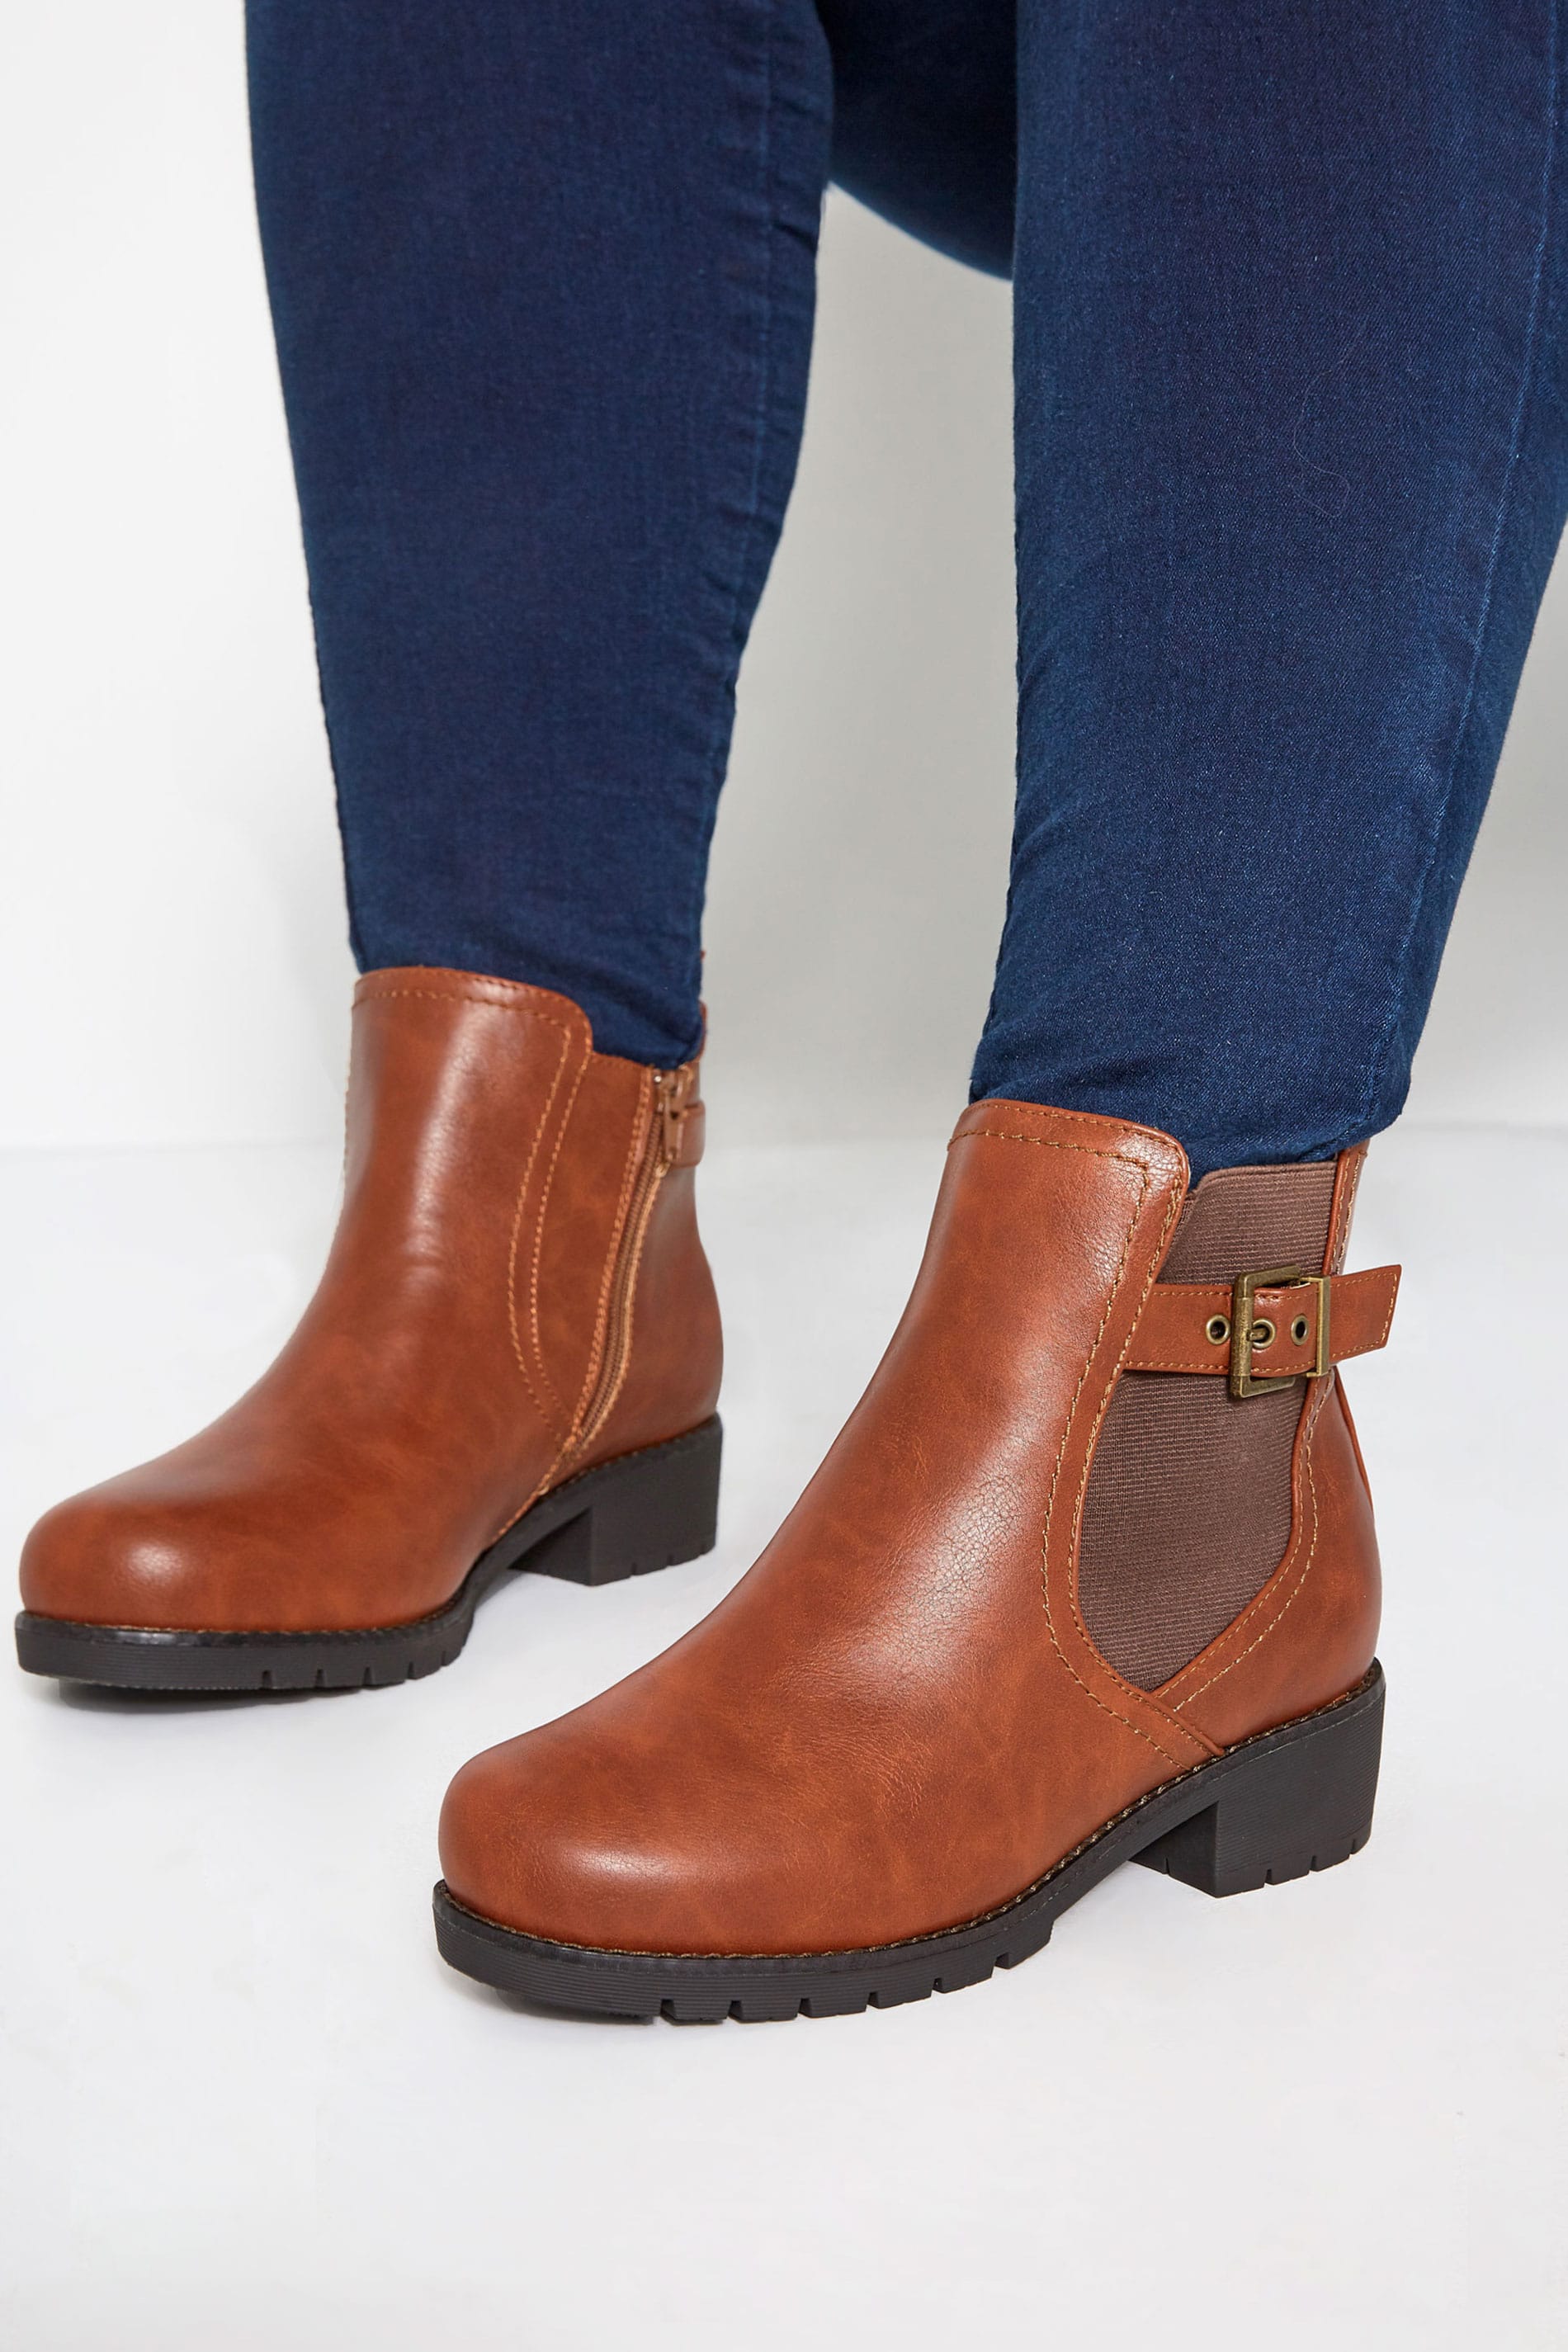 faith wide fit chelsea boots